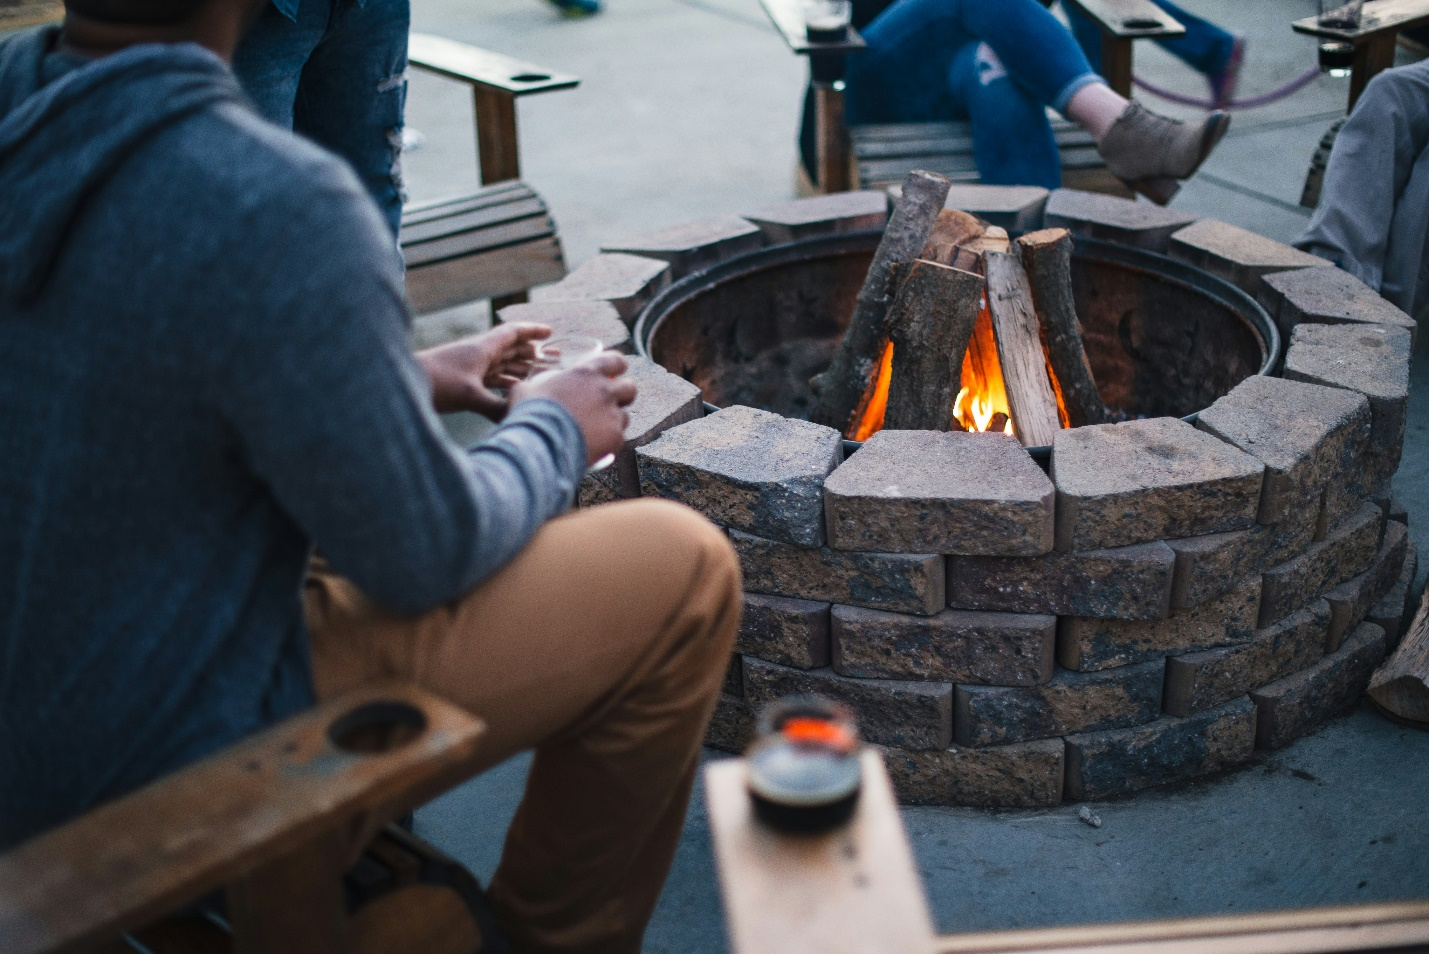 People sit around an outdoor bonfire surrounded by bricks